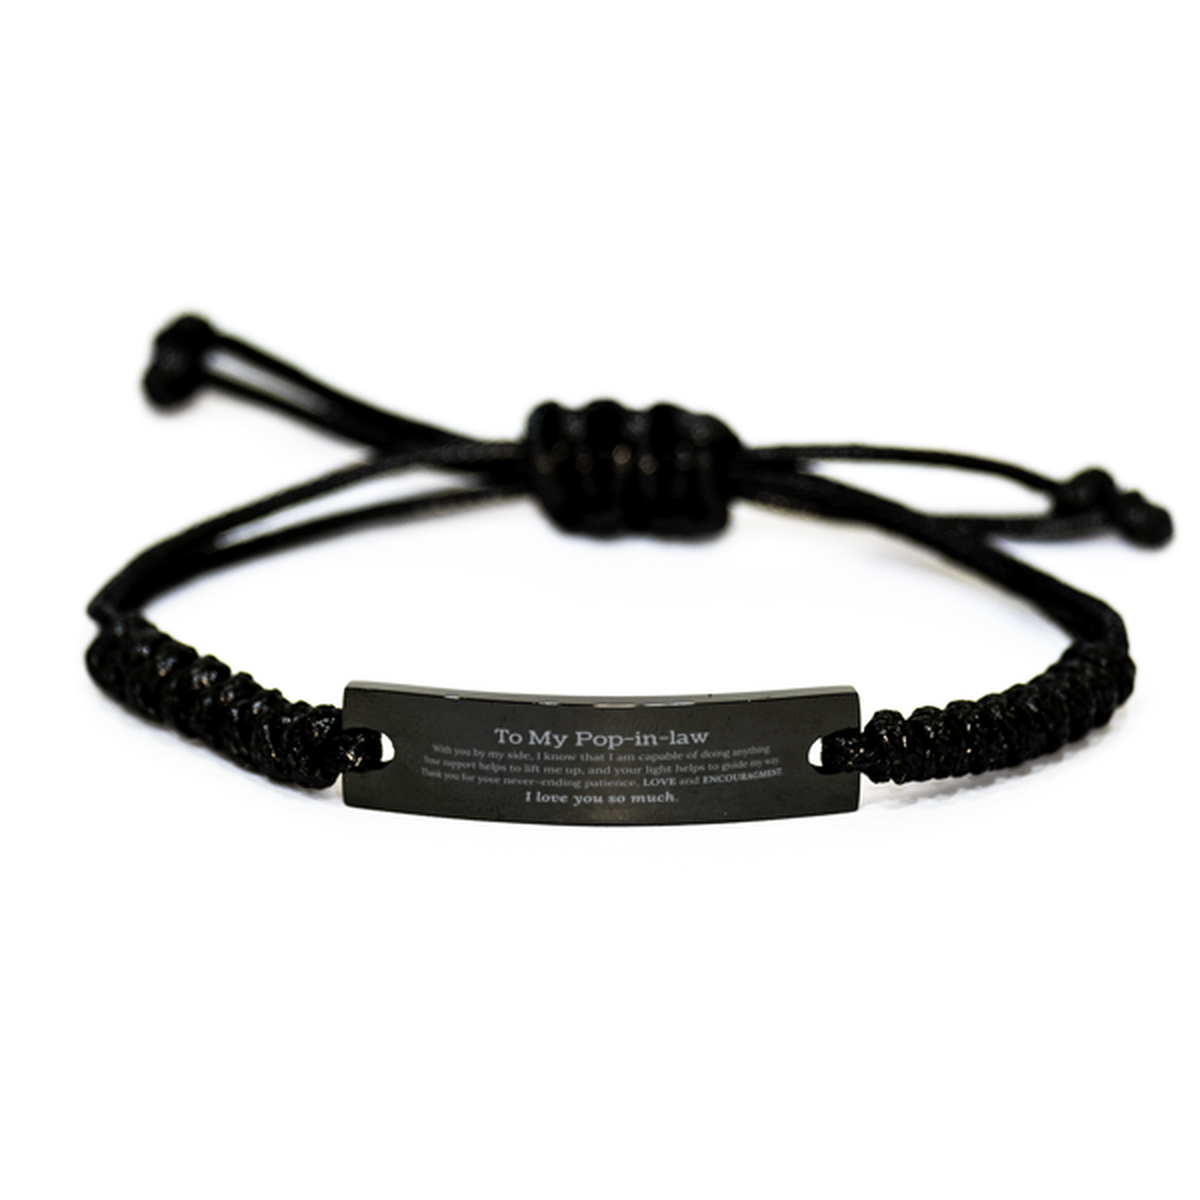 Appreciation Pop-in-law Black Rope Bracelet Gifts, To My Pop-in-law Birthday Christmas Wedding Keepsake Gifts for Pop-in-law With you by my side, I know that I am capable of doing anything. I love you so much